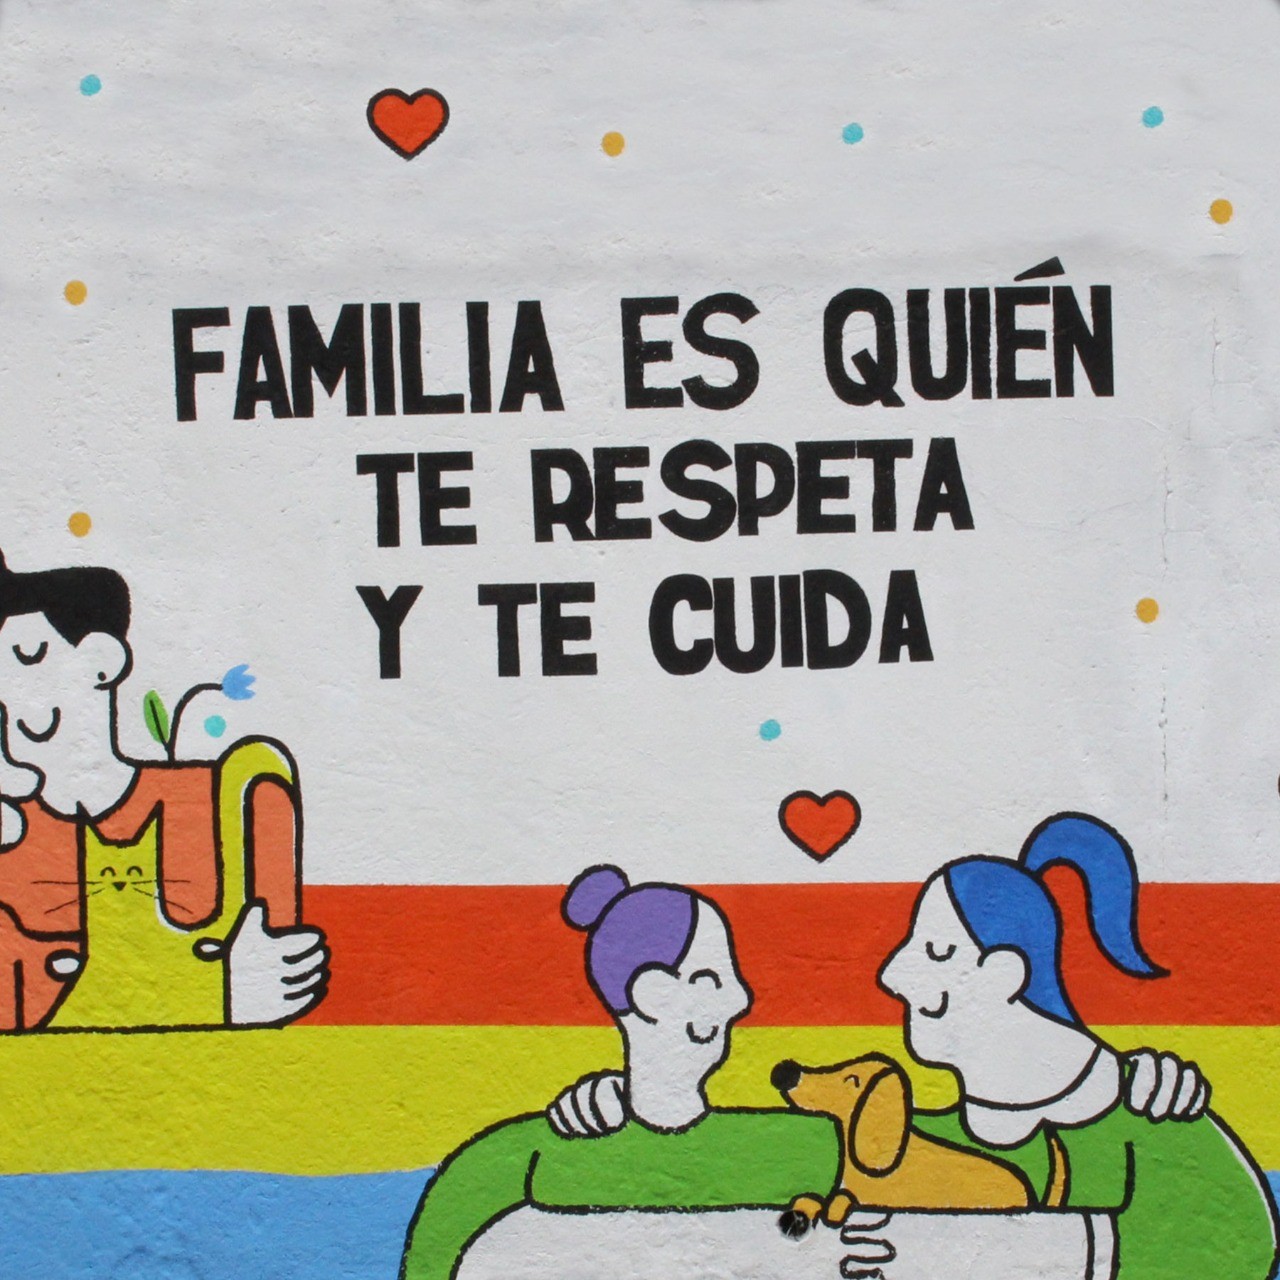 SweetRush created this mural with Casa Rara, a foster house for LGBTQ+ youth, with an uplifting message about families.